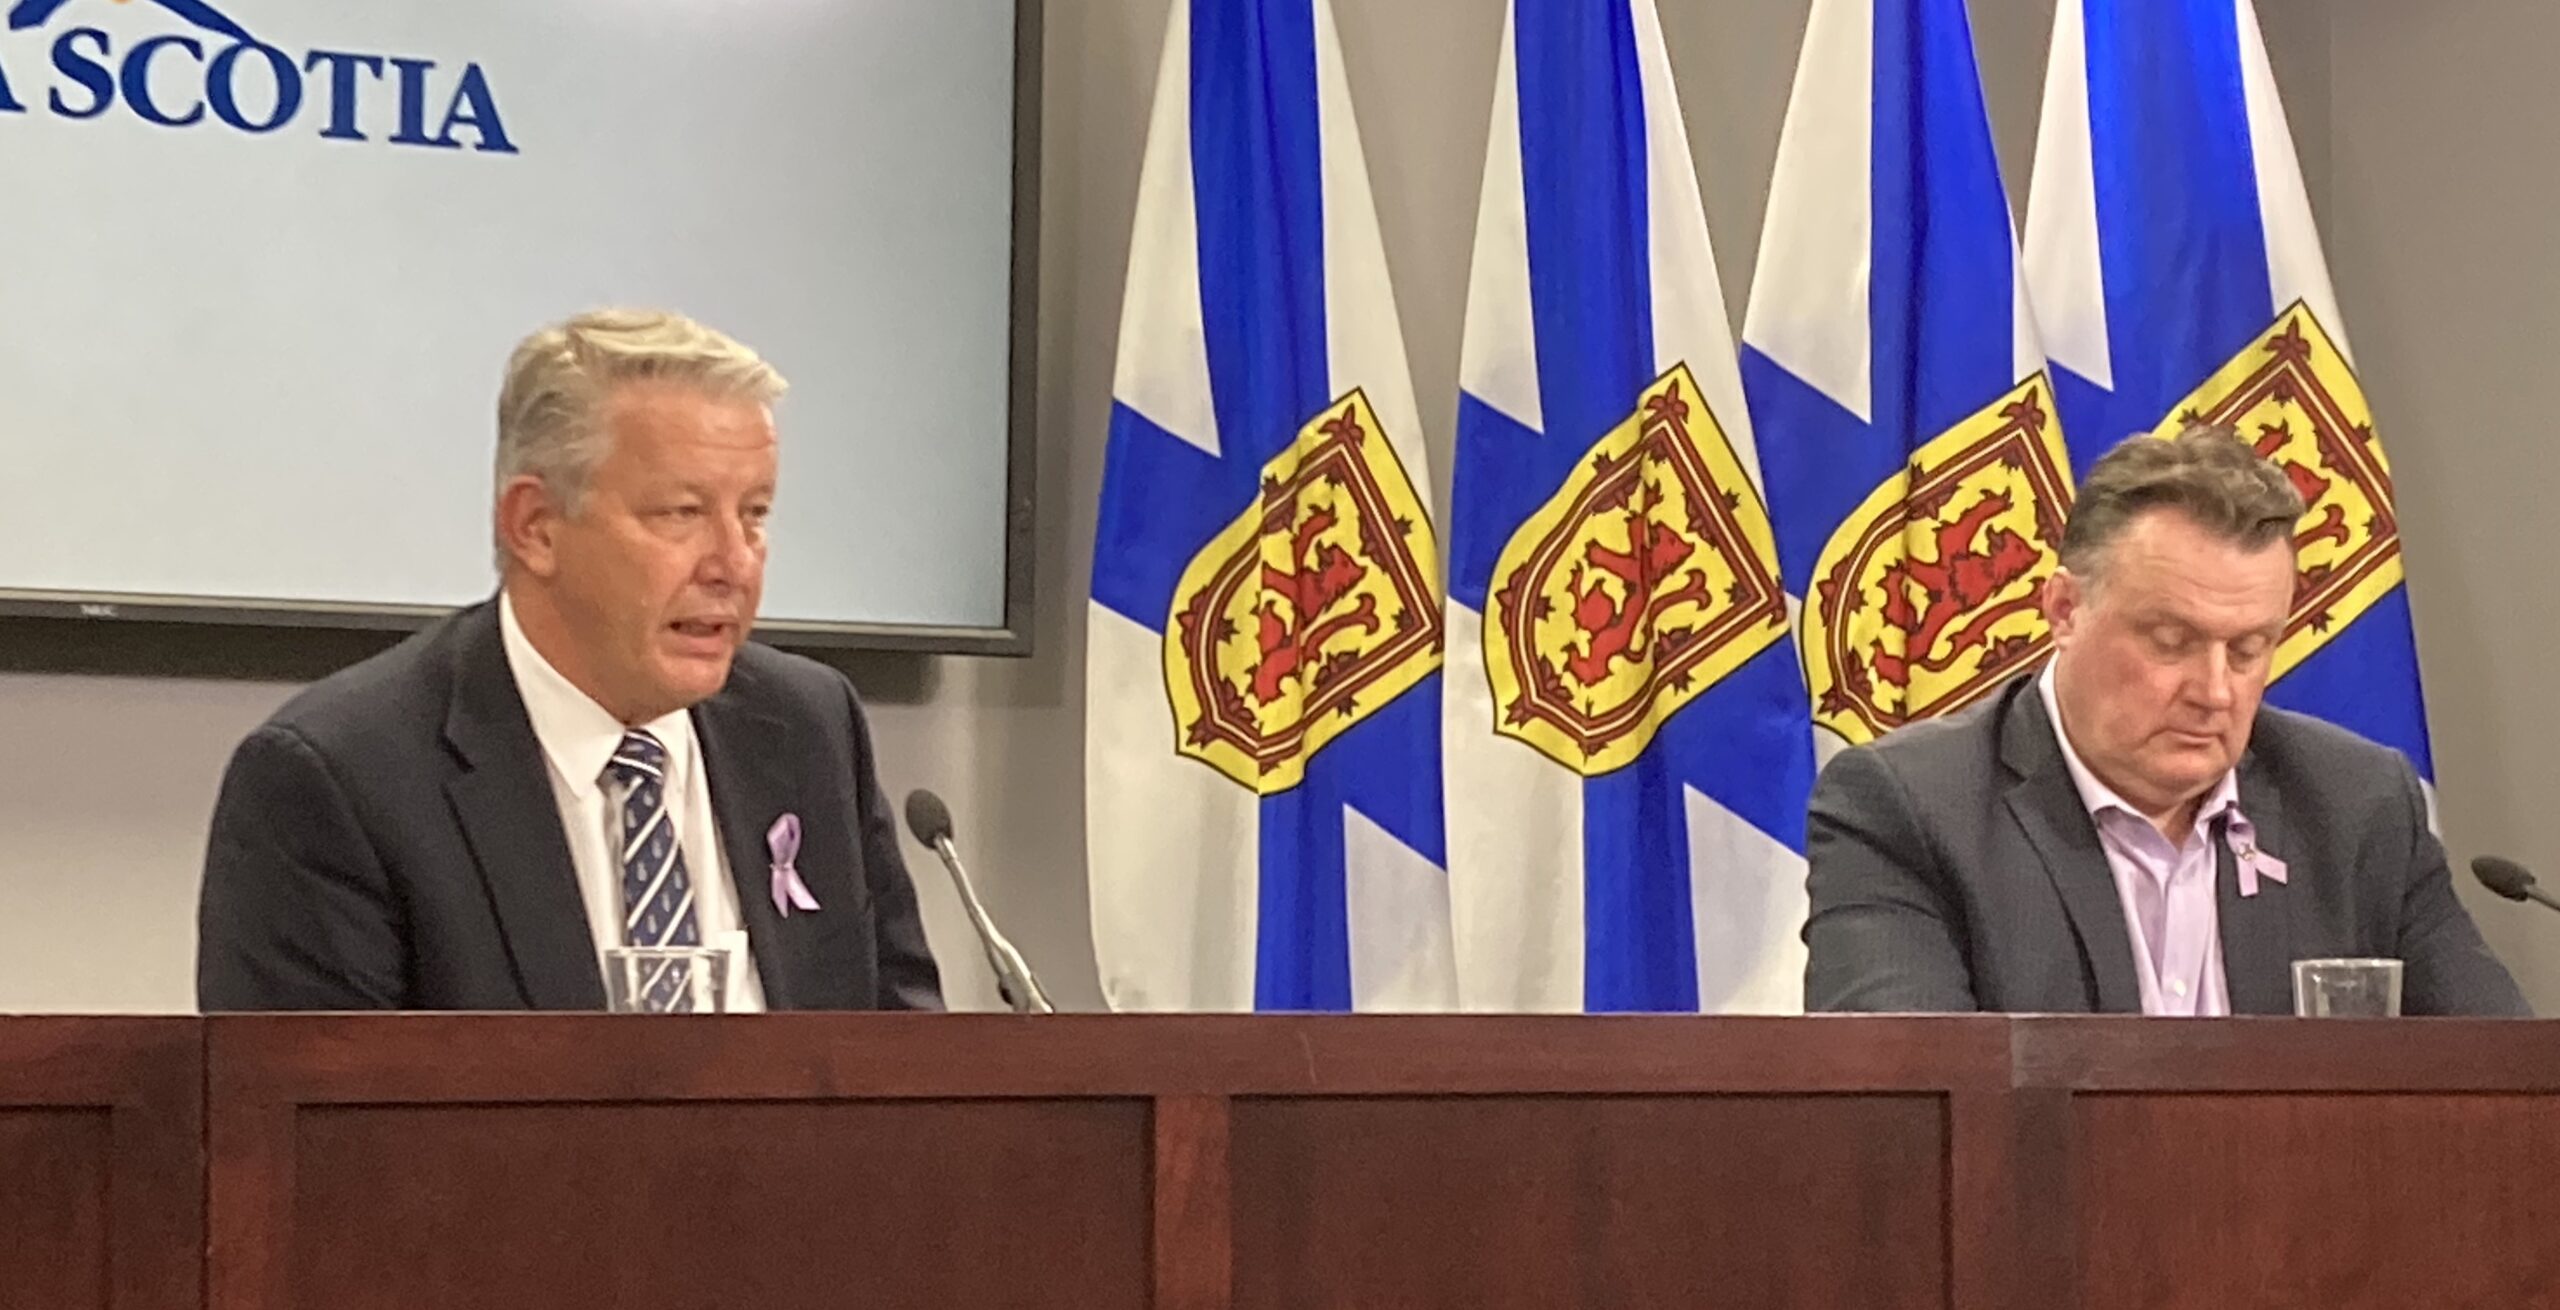 Two men sit at a desk with Nova Scotia flags in the background